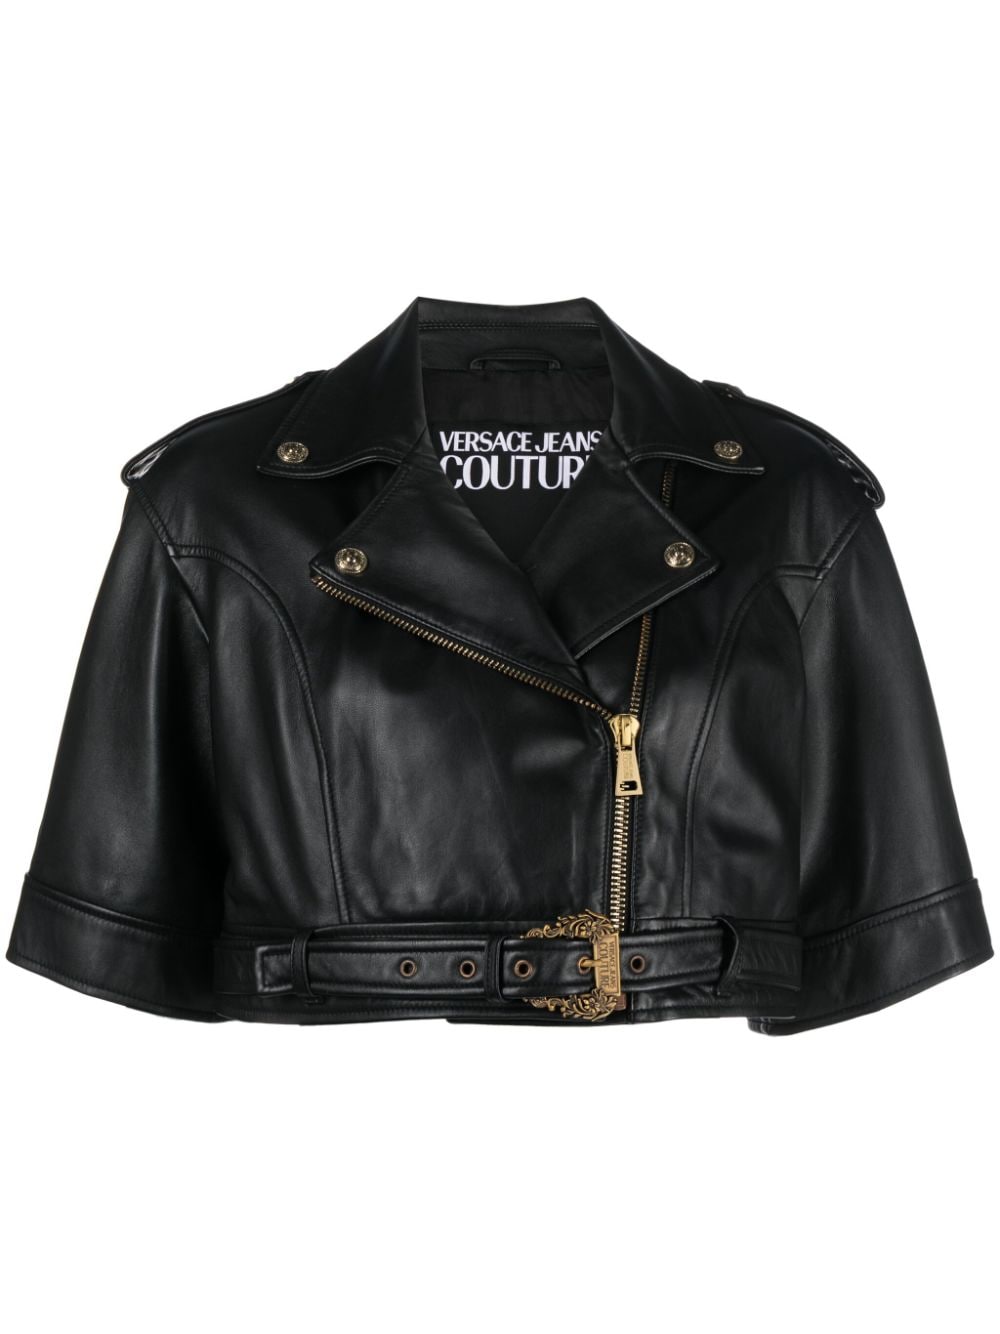 Versace Jeans Couture cropped leather jacket - Black von Versace Jeans Couture